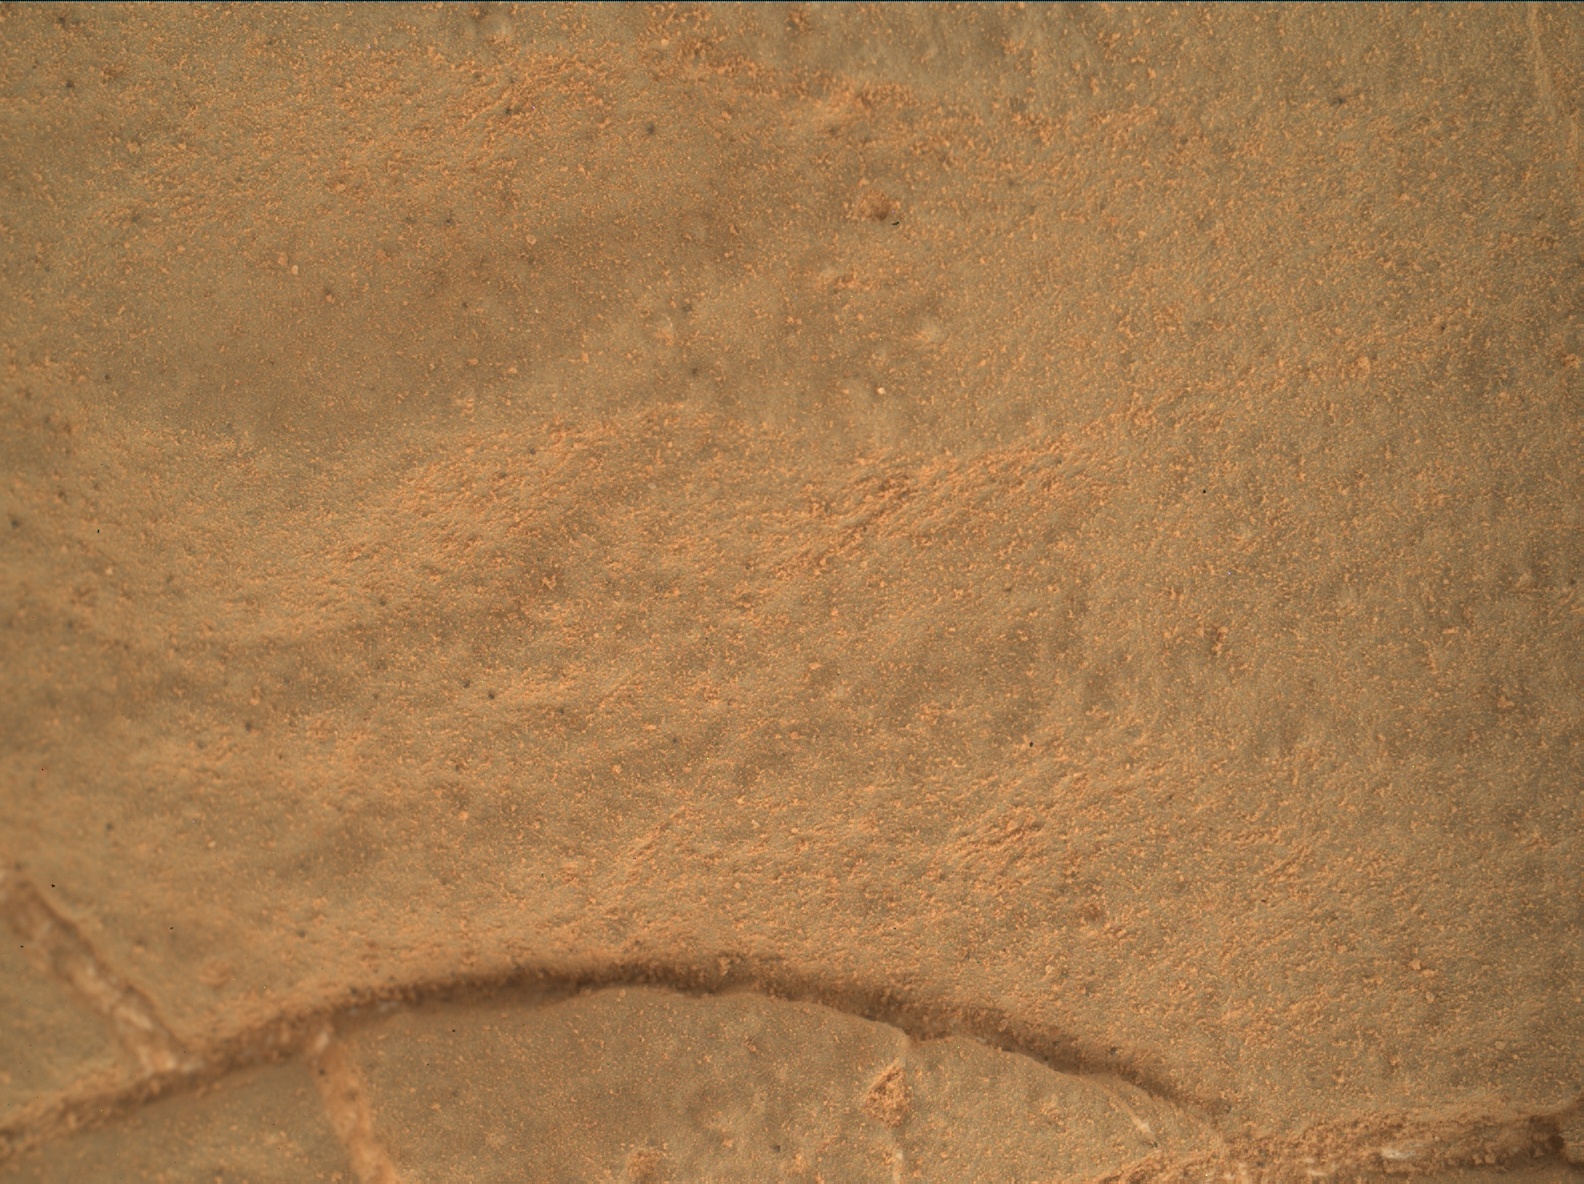 Nasa's Mars rover Curiosity acquired this image using its Mars Hand Lens Imager (MAHLI) on Sol 161